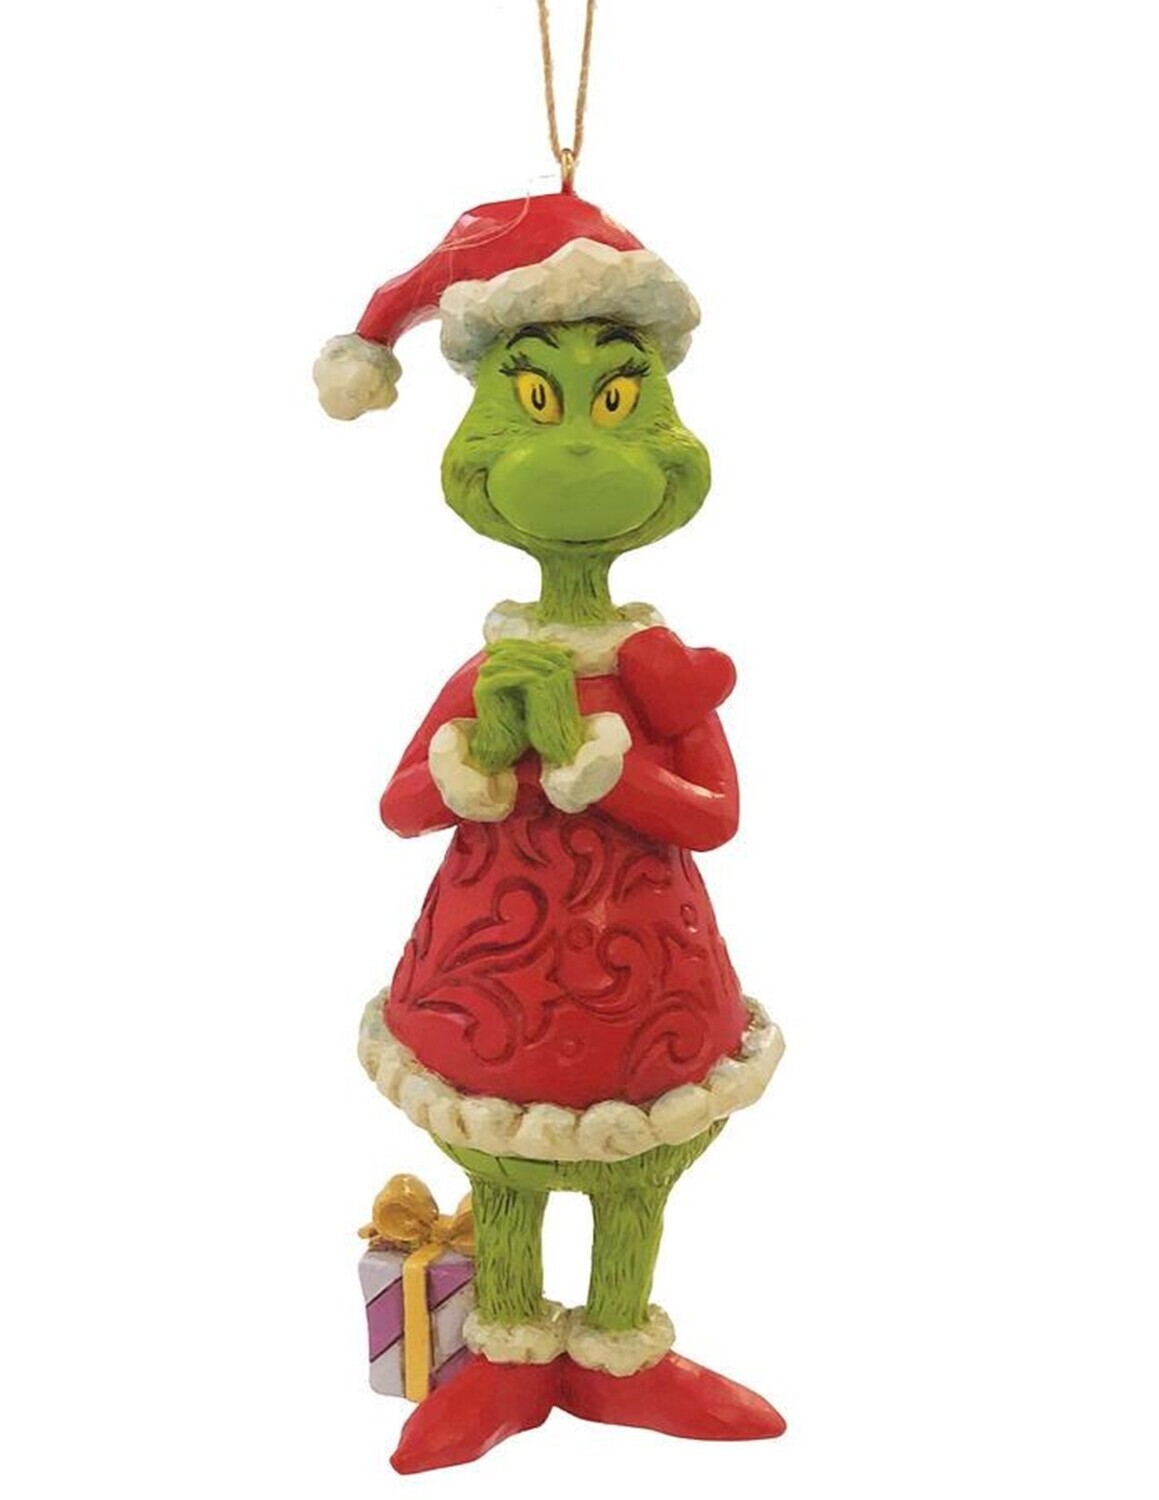 ​Jim Shore Grinch Collection "Grinch with Large Heart" Ornament (6010784)